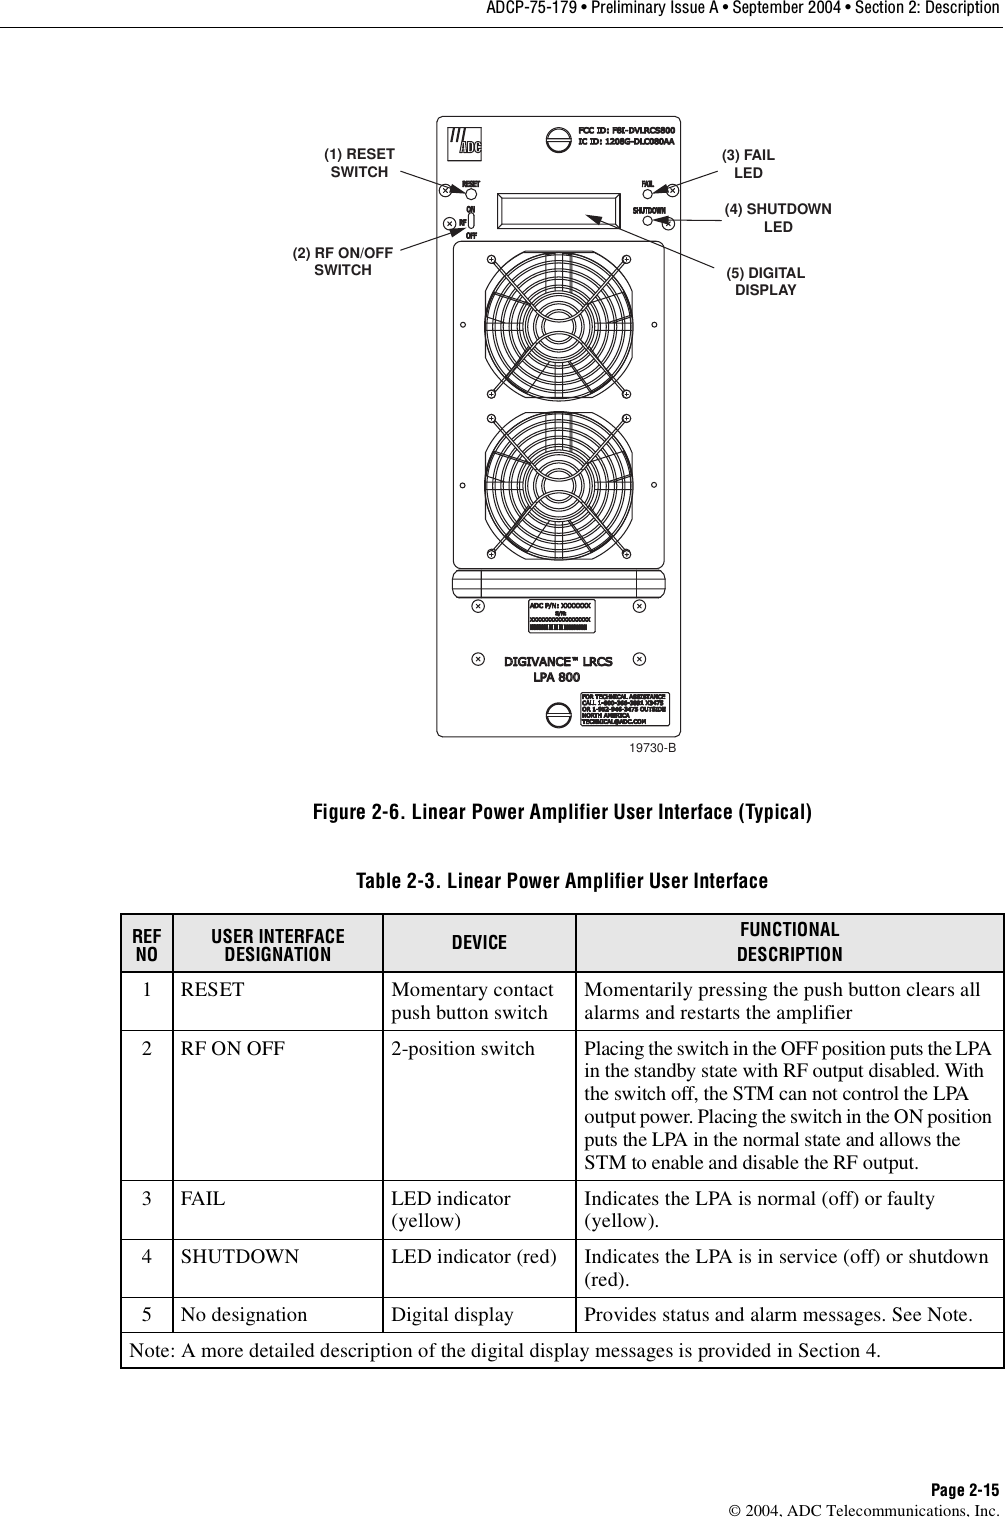 ADCP-75-179 • Preliminary Issue A • September 2004 • Section 2: DescriptionPage 2-15© 2004, ADC Telecommunications, Inc.Figure 2-6. Linear Power Amplifier User Interface (Typical)Table 2-3. Linear Power Amplifier User InterfaceREF NOUSER INTERFACE DESIGNATION DEVICE FUNCTIONALDESCRIPTION1 RESET Momentary contact push button switch Momentarily pressing the push button clears all alarms and restarts the amplifier2 RF ON OFF 2-position switch Placing the switch in the OFF position puts the LPA in the standby state with RF output disabled. With the switch off, the STM can not control the LPA output power. Placing the switch in the ON position puts the LPA in the normal state and allows the STM to enable and disable the RF output. 3FAIL LED indicator (yellow) Indicates the LPA is normal (off) or faulty (yellow). 4 SHUTDOWN LED indicator (red) Indicates the LPA is in service (off) or shutdown (red). 5 No designation Digital display Provides status and alarm messages. See Note. Note: A more detailed description of the digital display messages is provided in Section 4. 19730-B(1) RESETSWITCH(2) RF ON/OFFSWITCH(3) FAILLED(4) SHUTDOWNLED(5) DIGITALDISPLAY